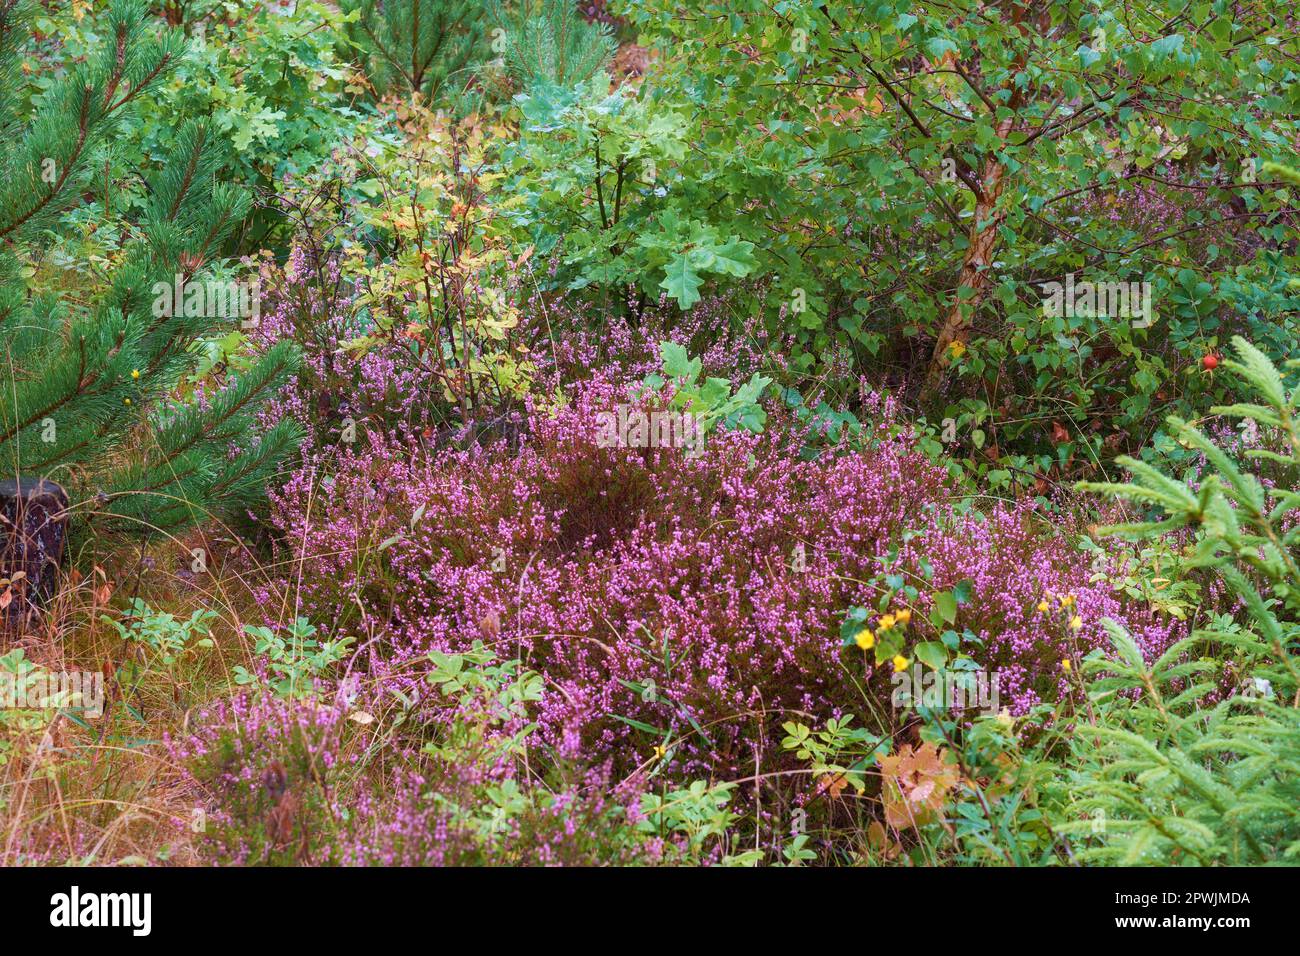 Scotch heather flowers growing in a forest with pine trees and other plant species. Lush green field with various flowering bushes in a garden. Overgr Stock Photo